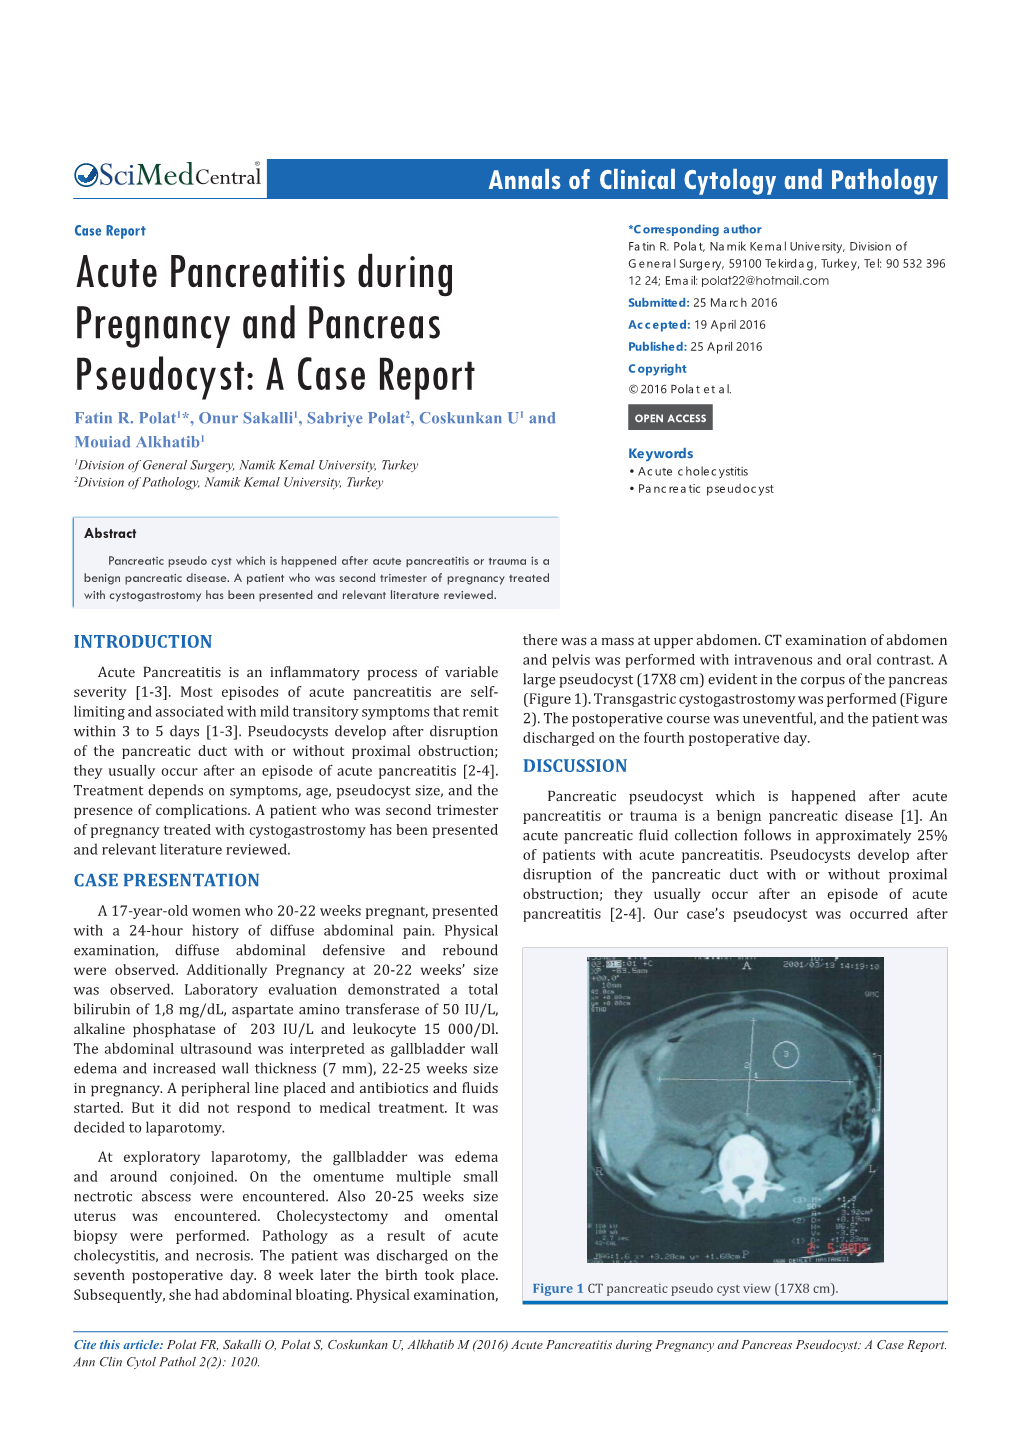 Acute Pancreatitis During Pregnancy and Pancreas Pseudocyst: a Case Report